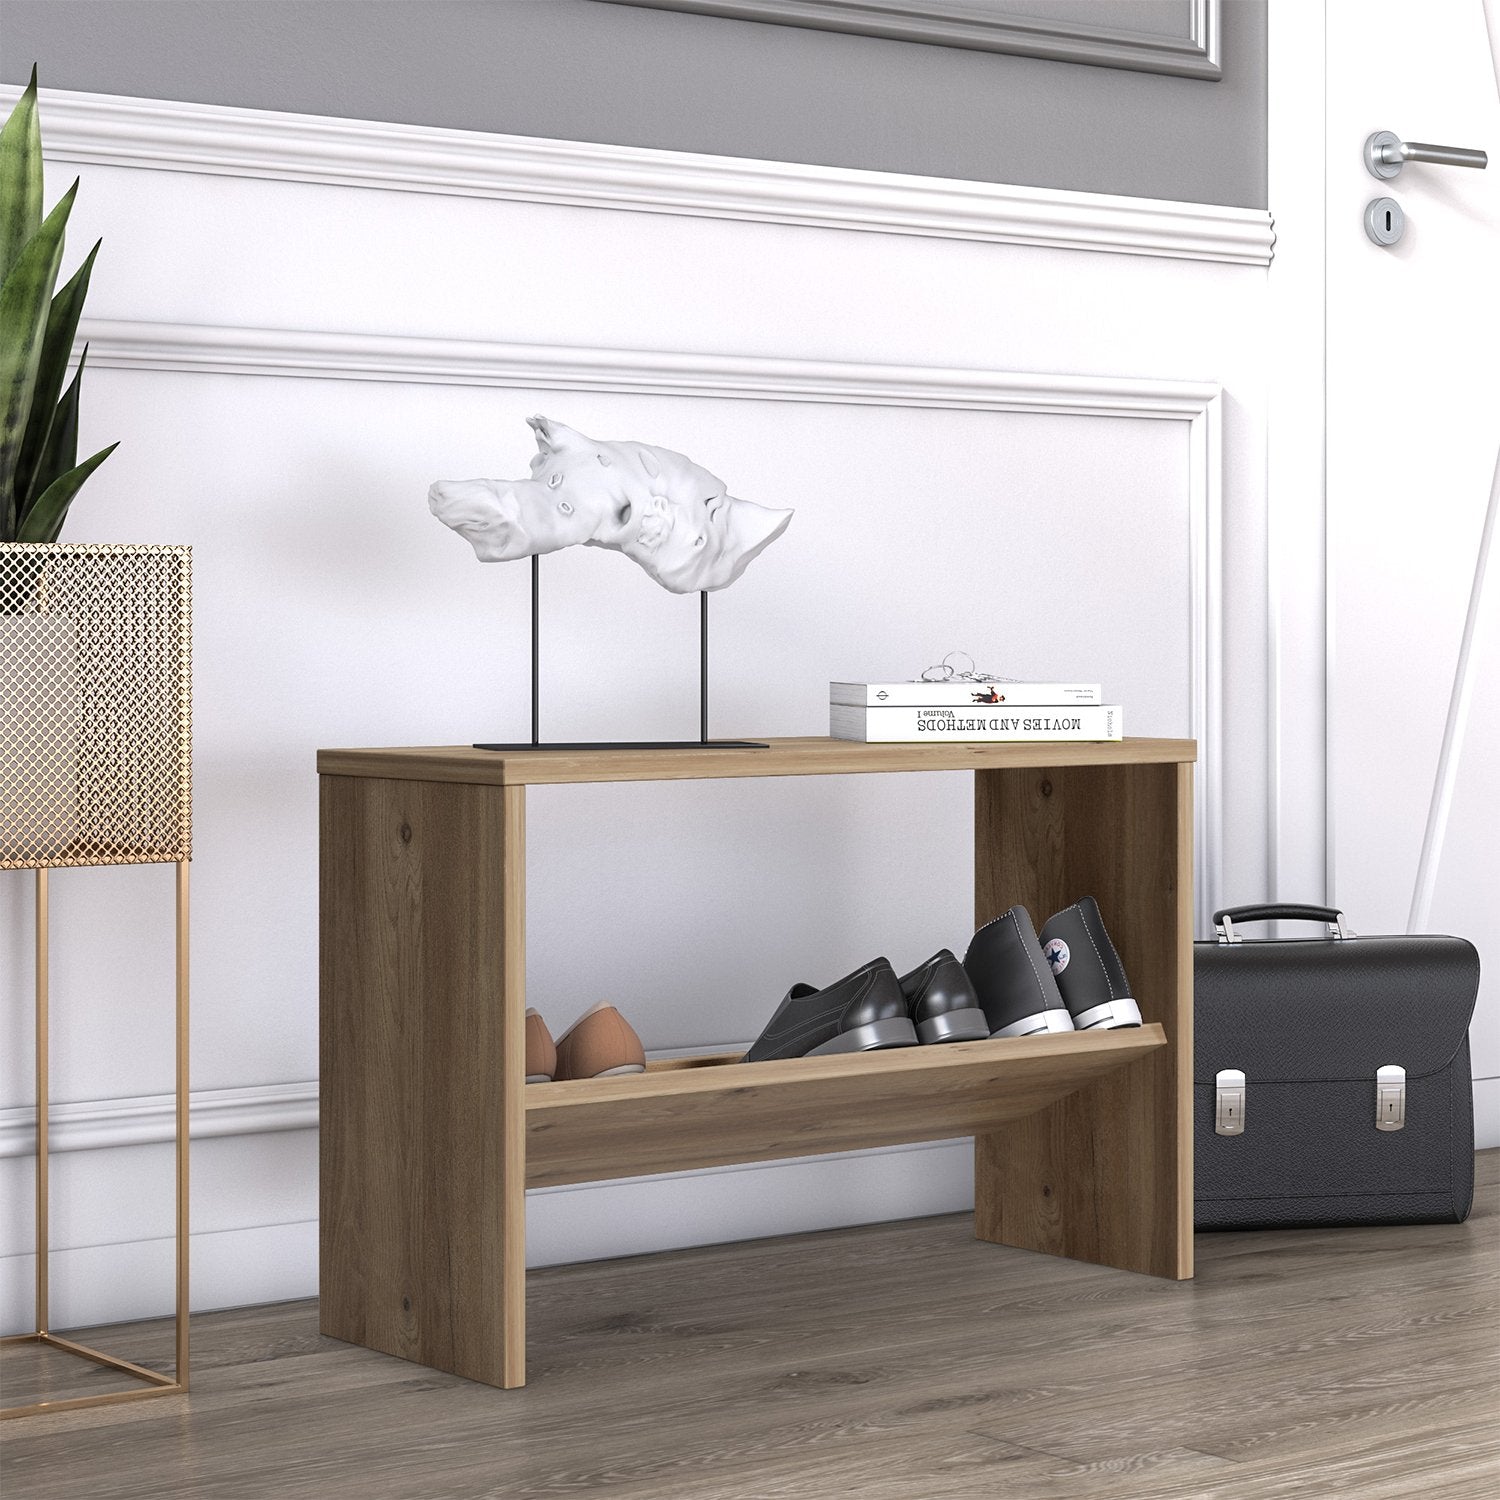 Mio 4 Pair Shoe Cabinet with Bench by Ruumstore White